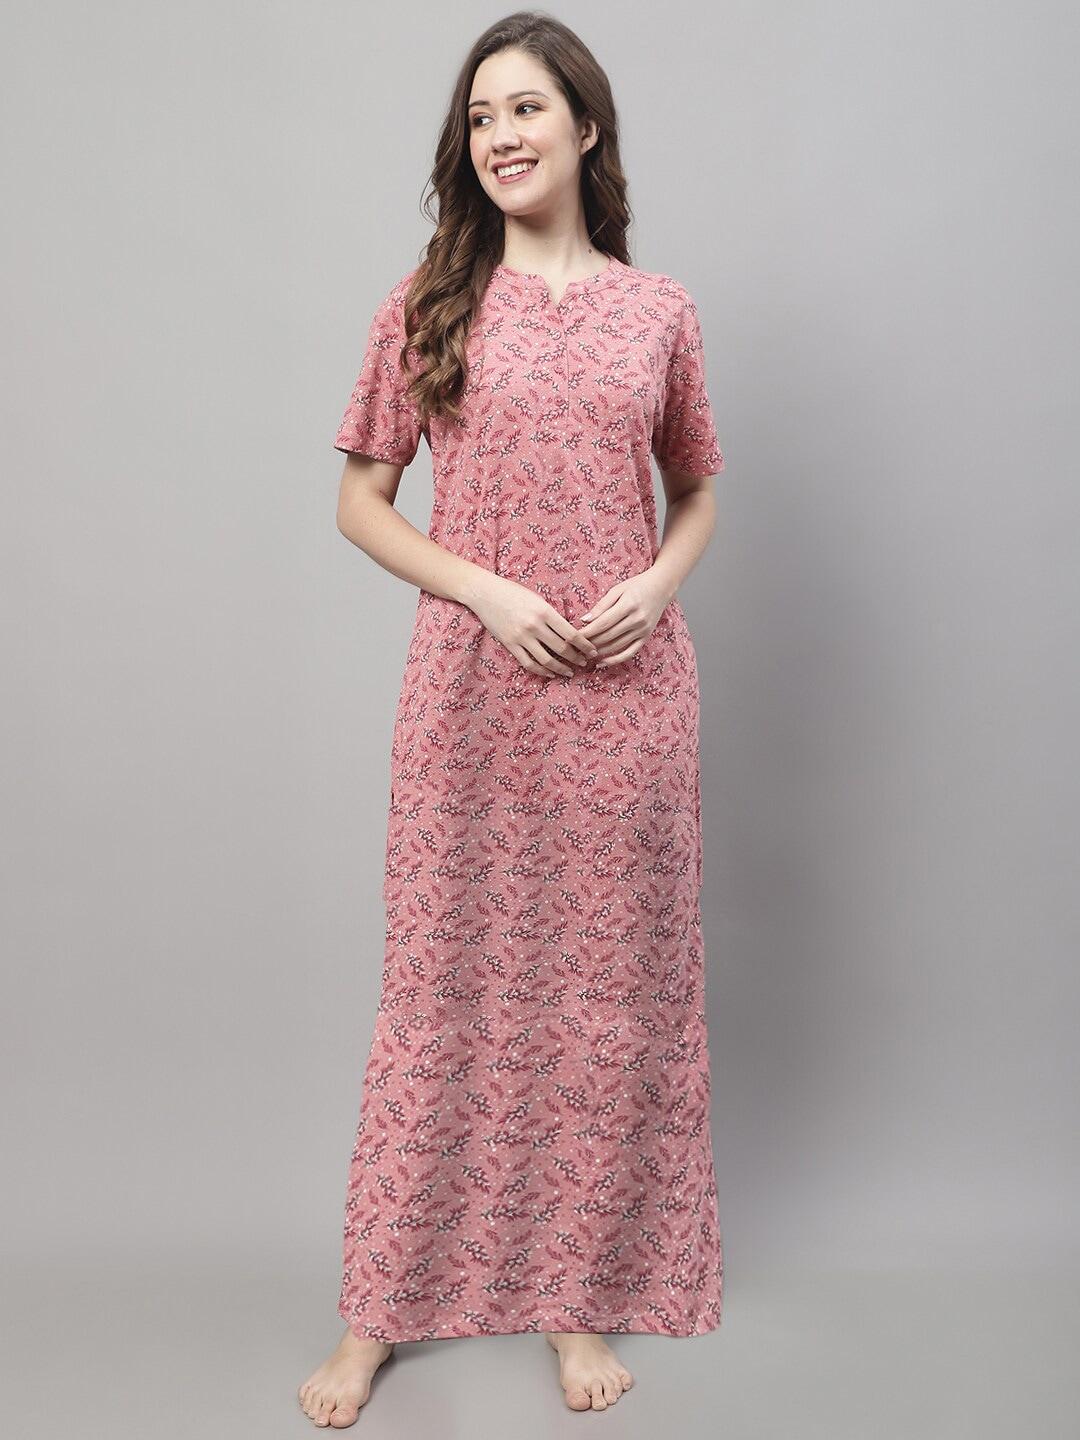 kanvin-floral-printed-pure-cotton-maxi-nightdress